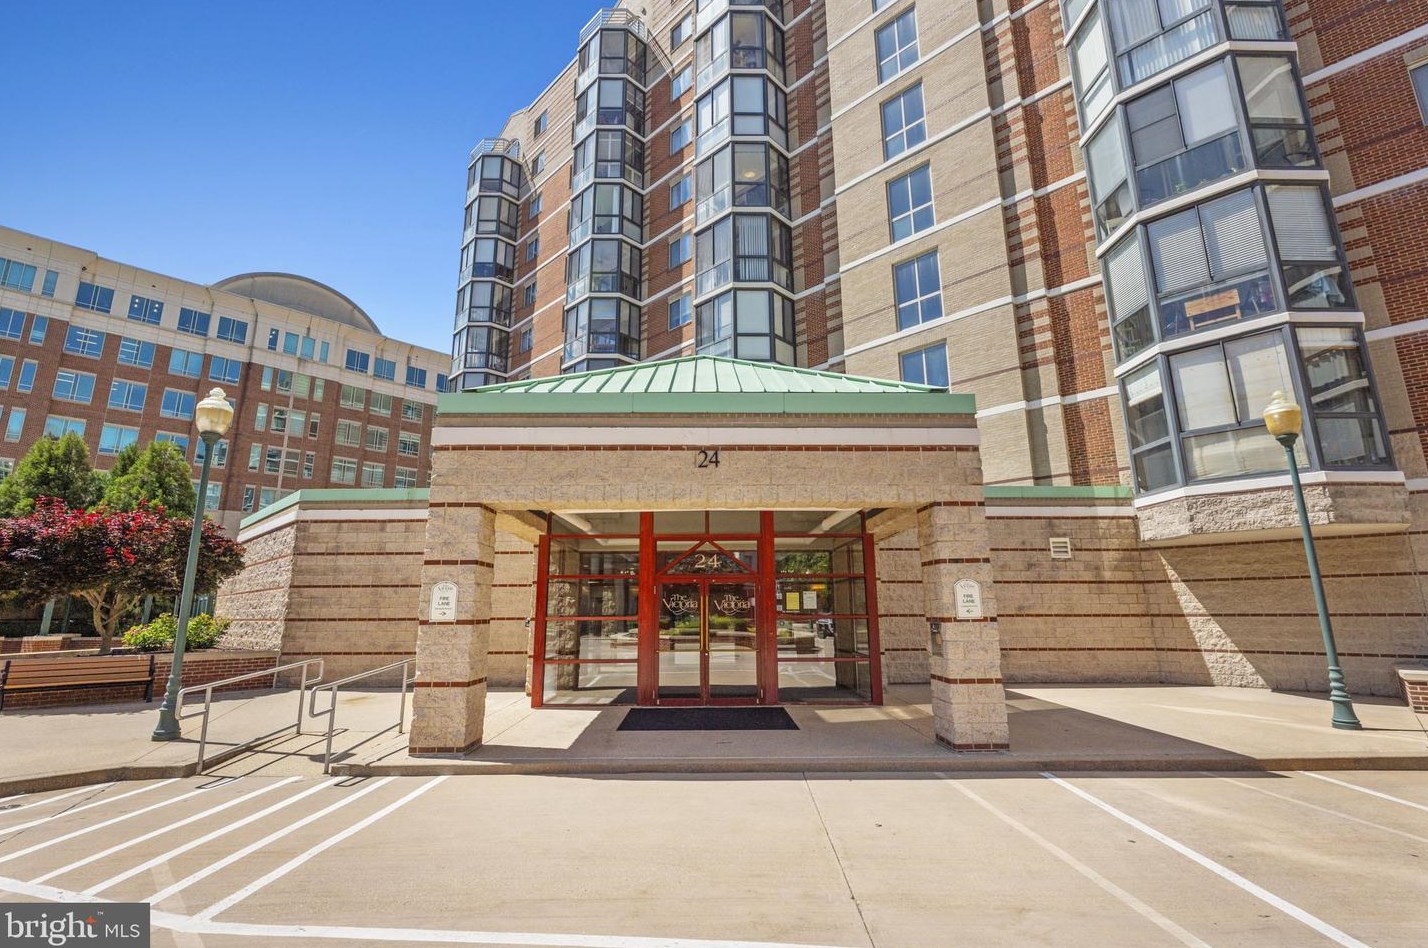 24 Courthouse Sq #709, Rockville, MD 20850